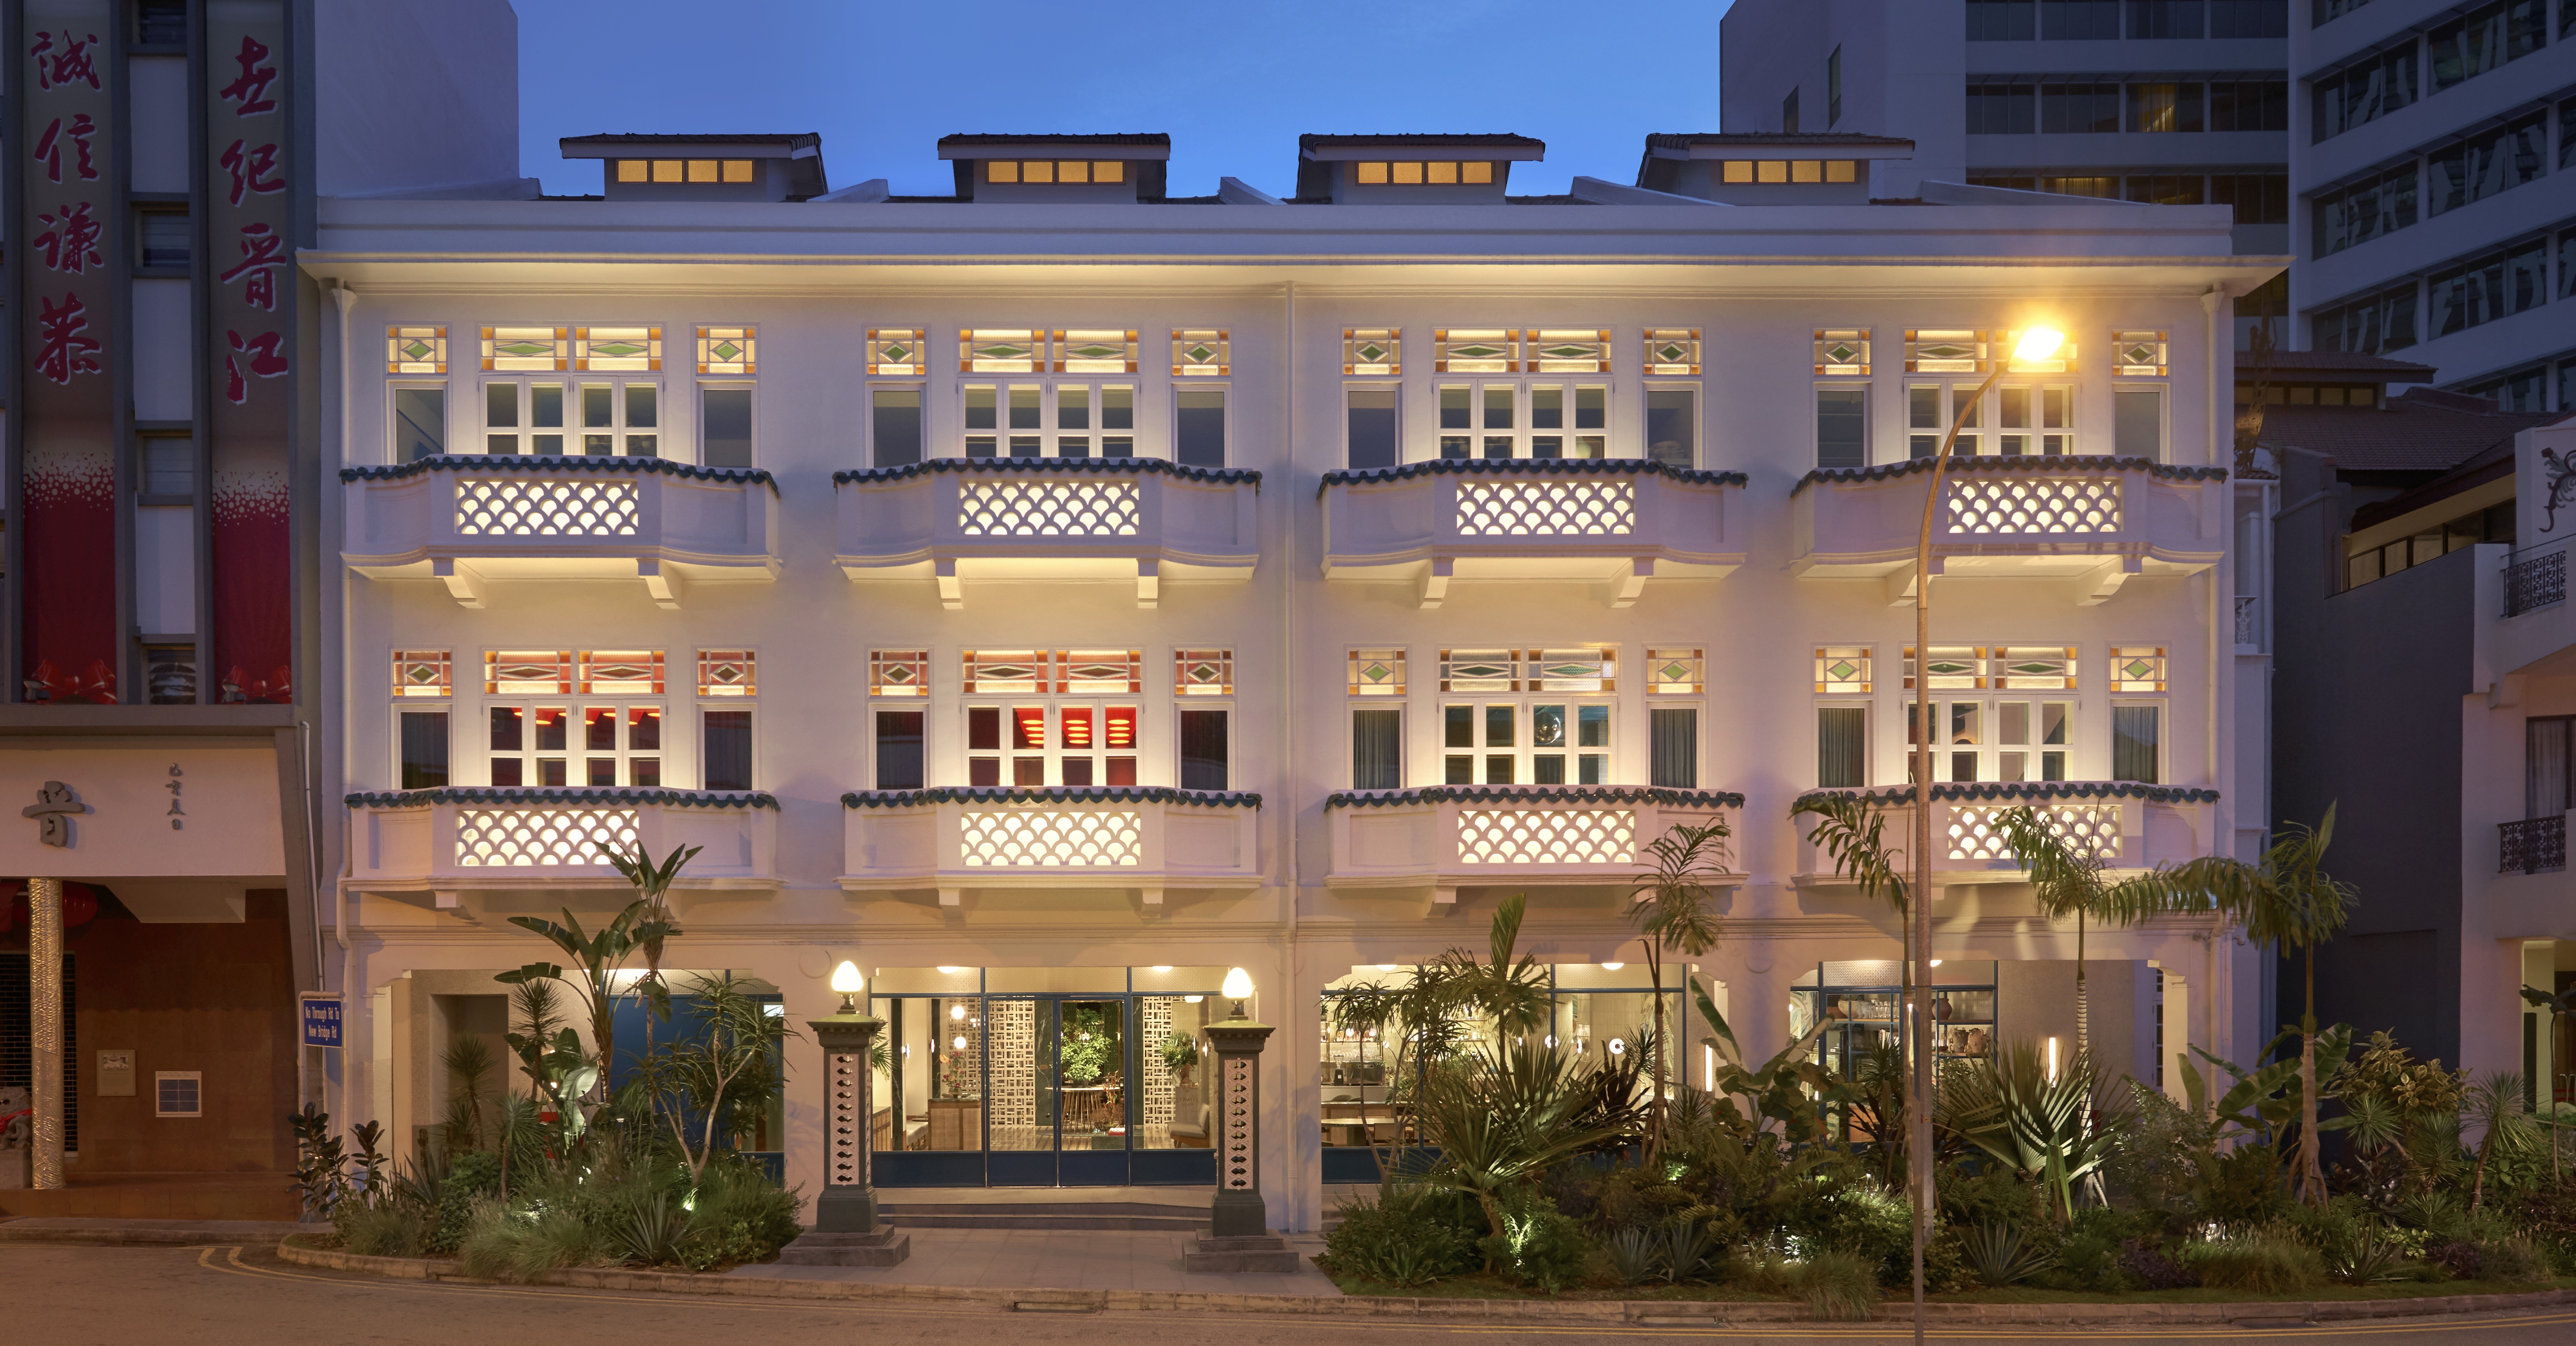 The majestic Straits Clan building in Singapore is an impressive symbol of the city’s revamped private club scene aimed at individuals from diverse backgrounds rather than families.